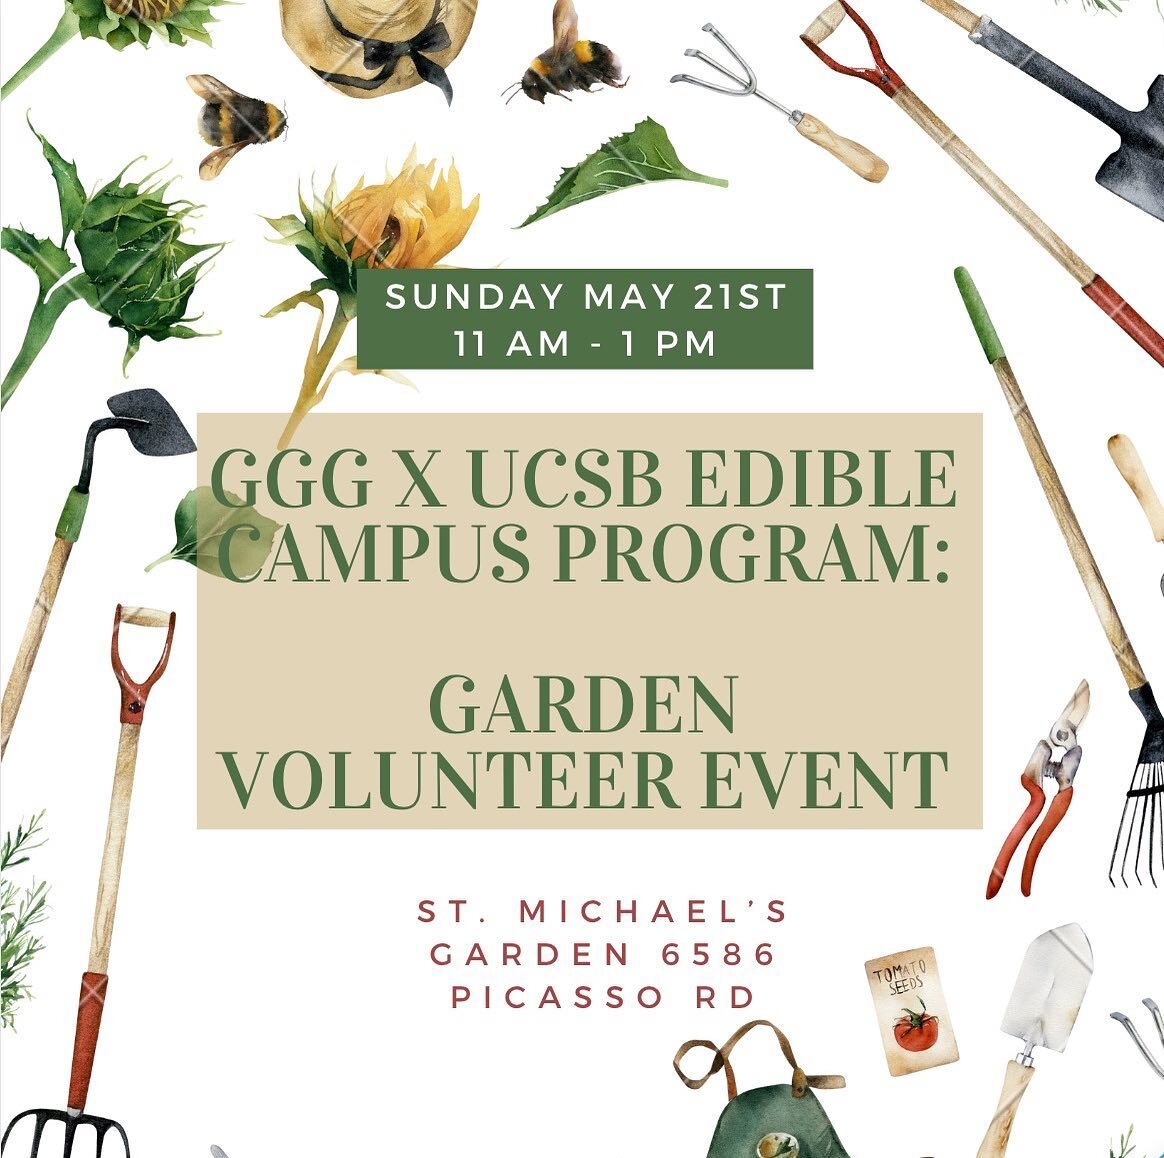 Join us this Sunday (5/21) for a gardening day with @ucsbecp to gain 2 community service hours! See you all there🏡🧑&zwj;🌾